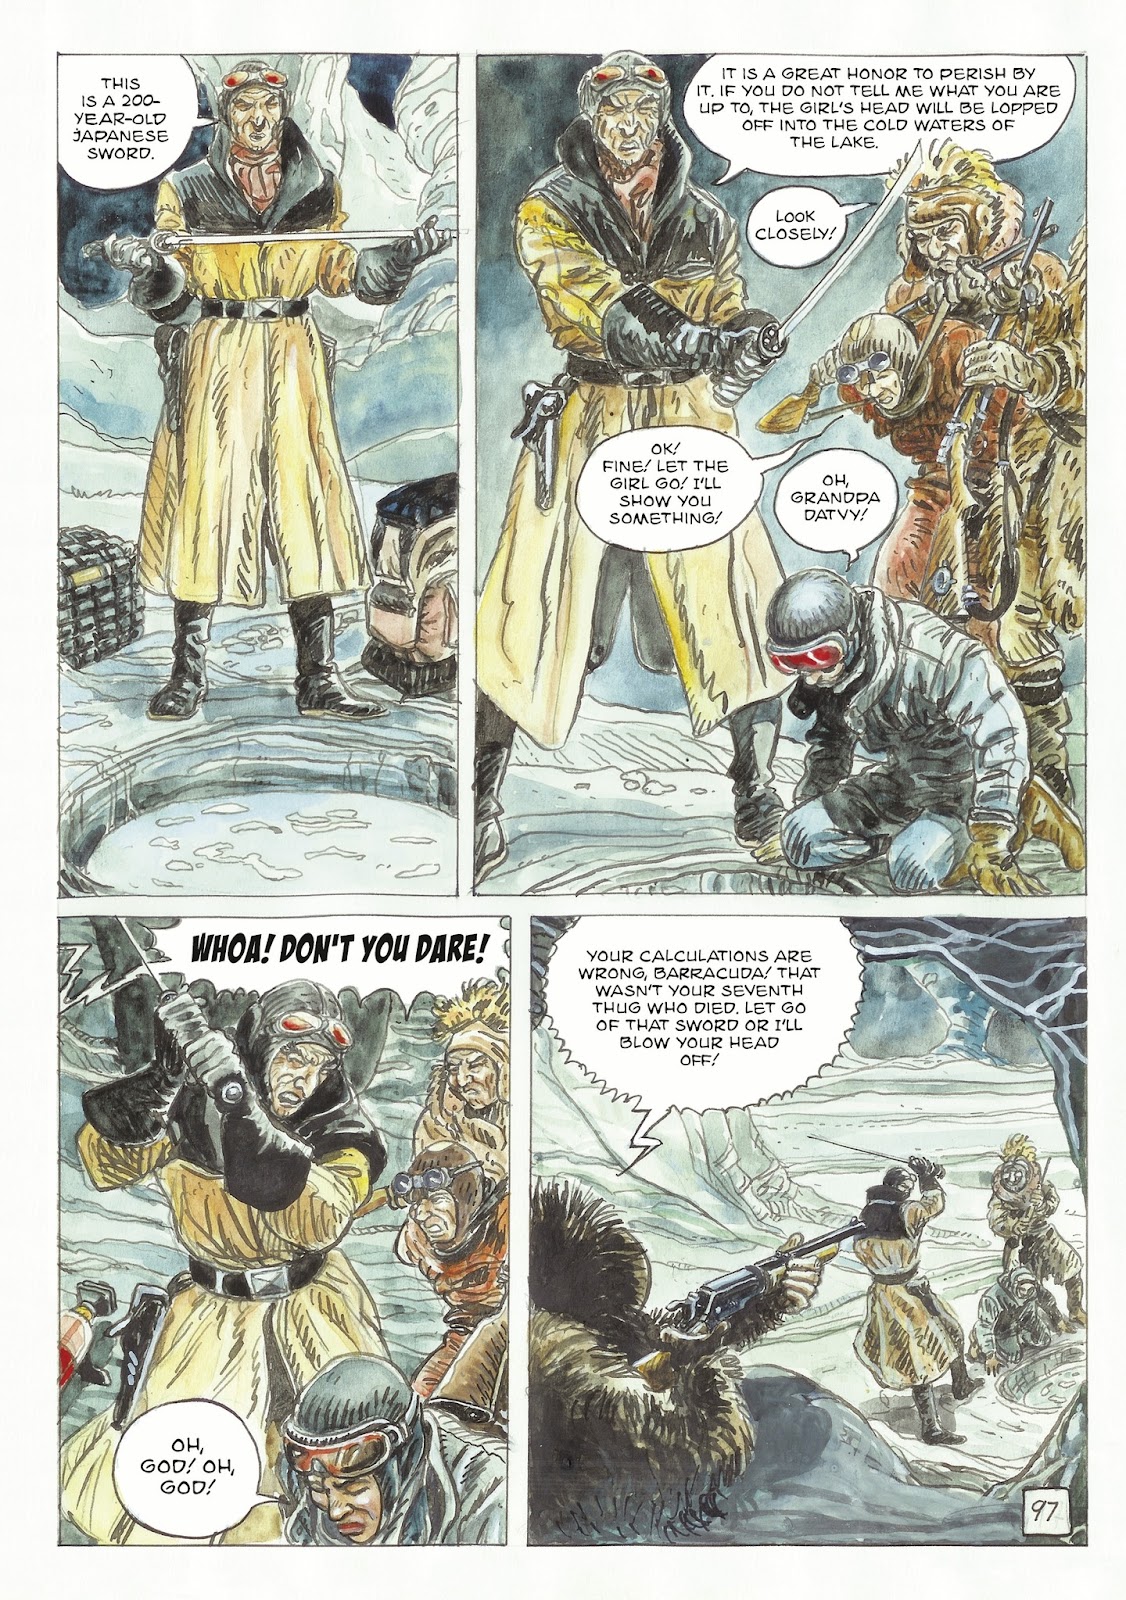 The Man With the Bear issue 2 - Page 43